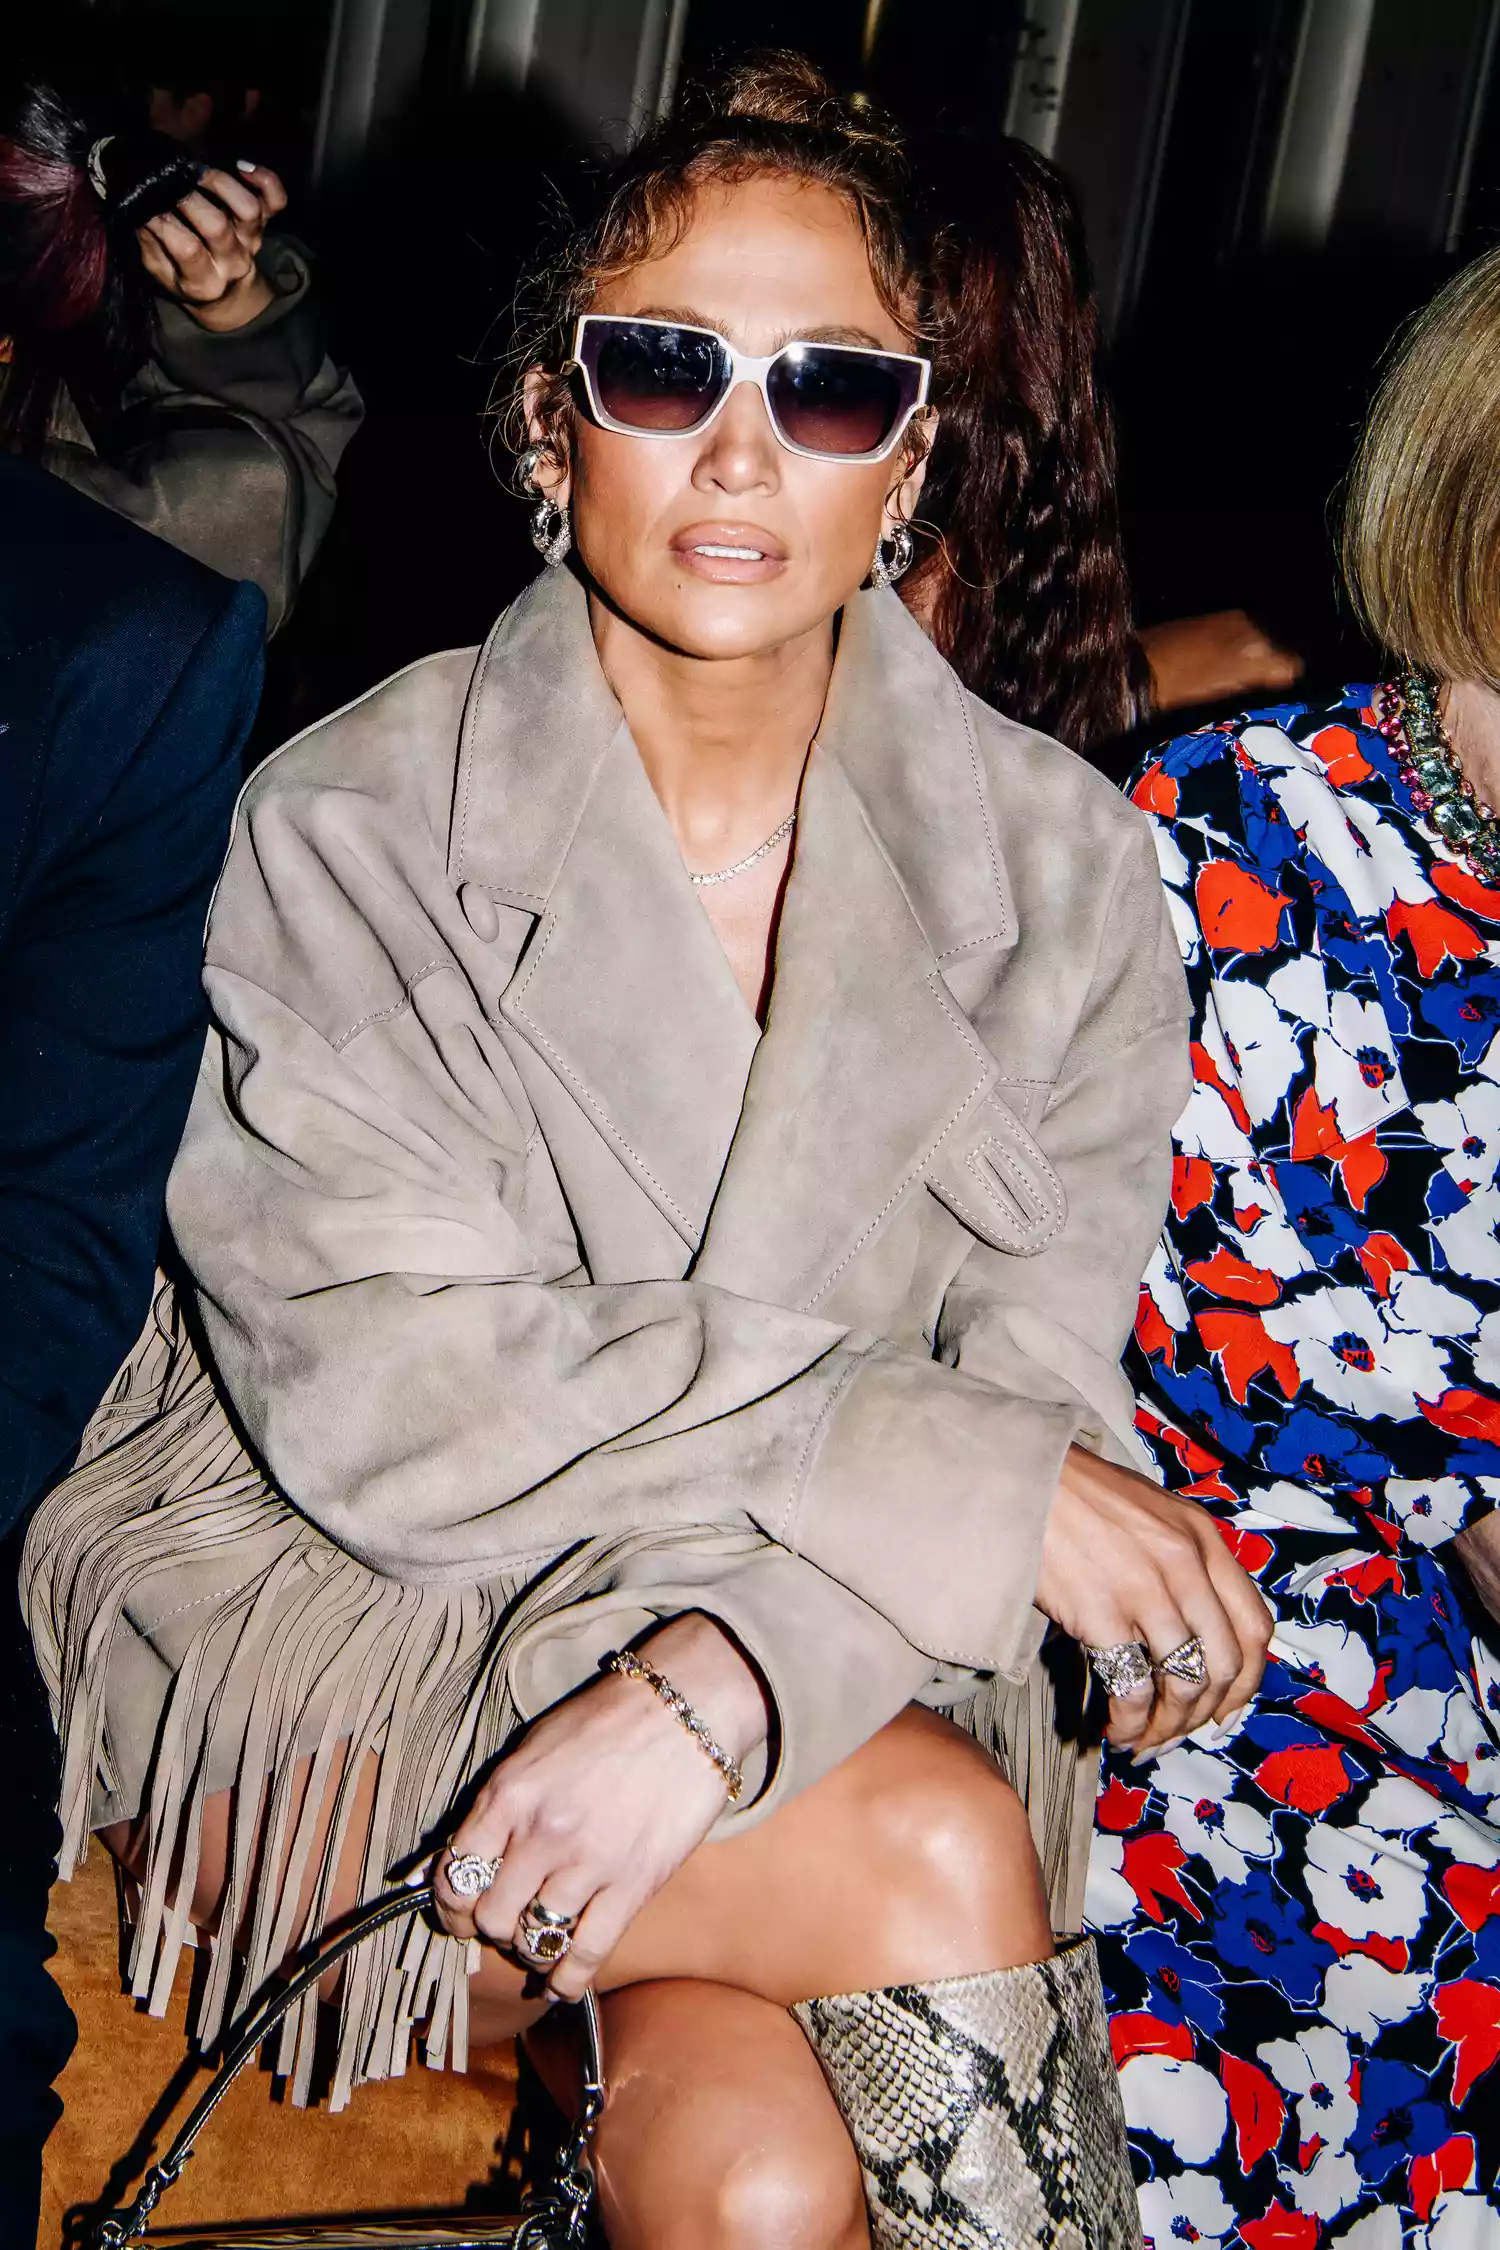 Celebrities Gracing the Front Row at New York Fashion Week From Jennifer Lopez to Camila Mendes, this season's lineup boasts stunning looks and star-studded sightings.